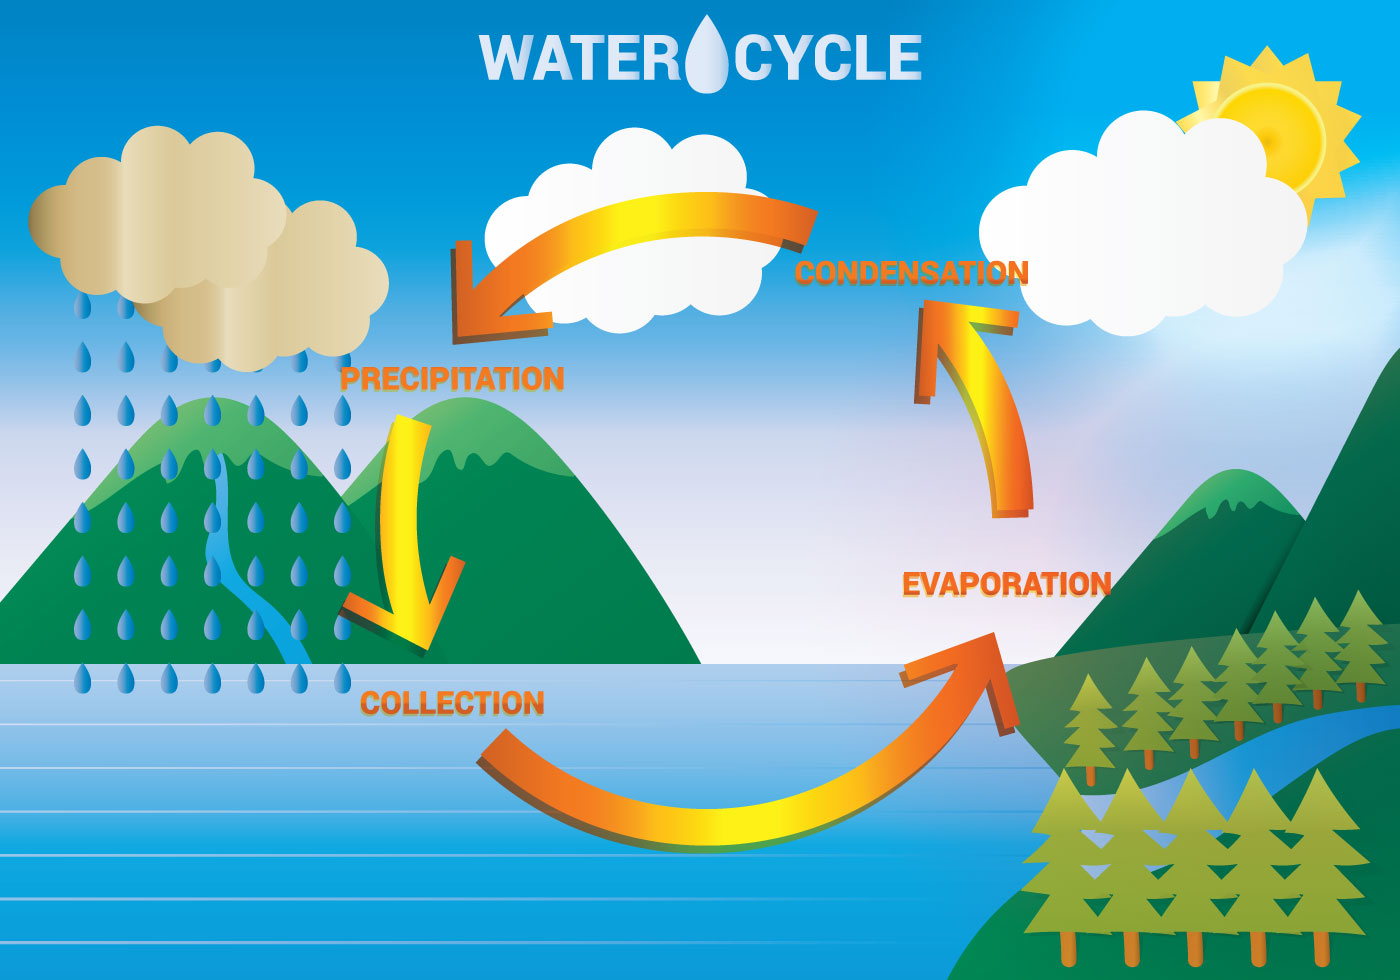 the water cycle | Kathy, The Picture Lady-cacanhphuclong.com.vn